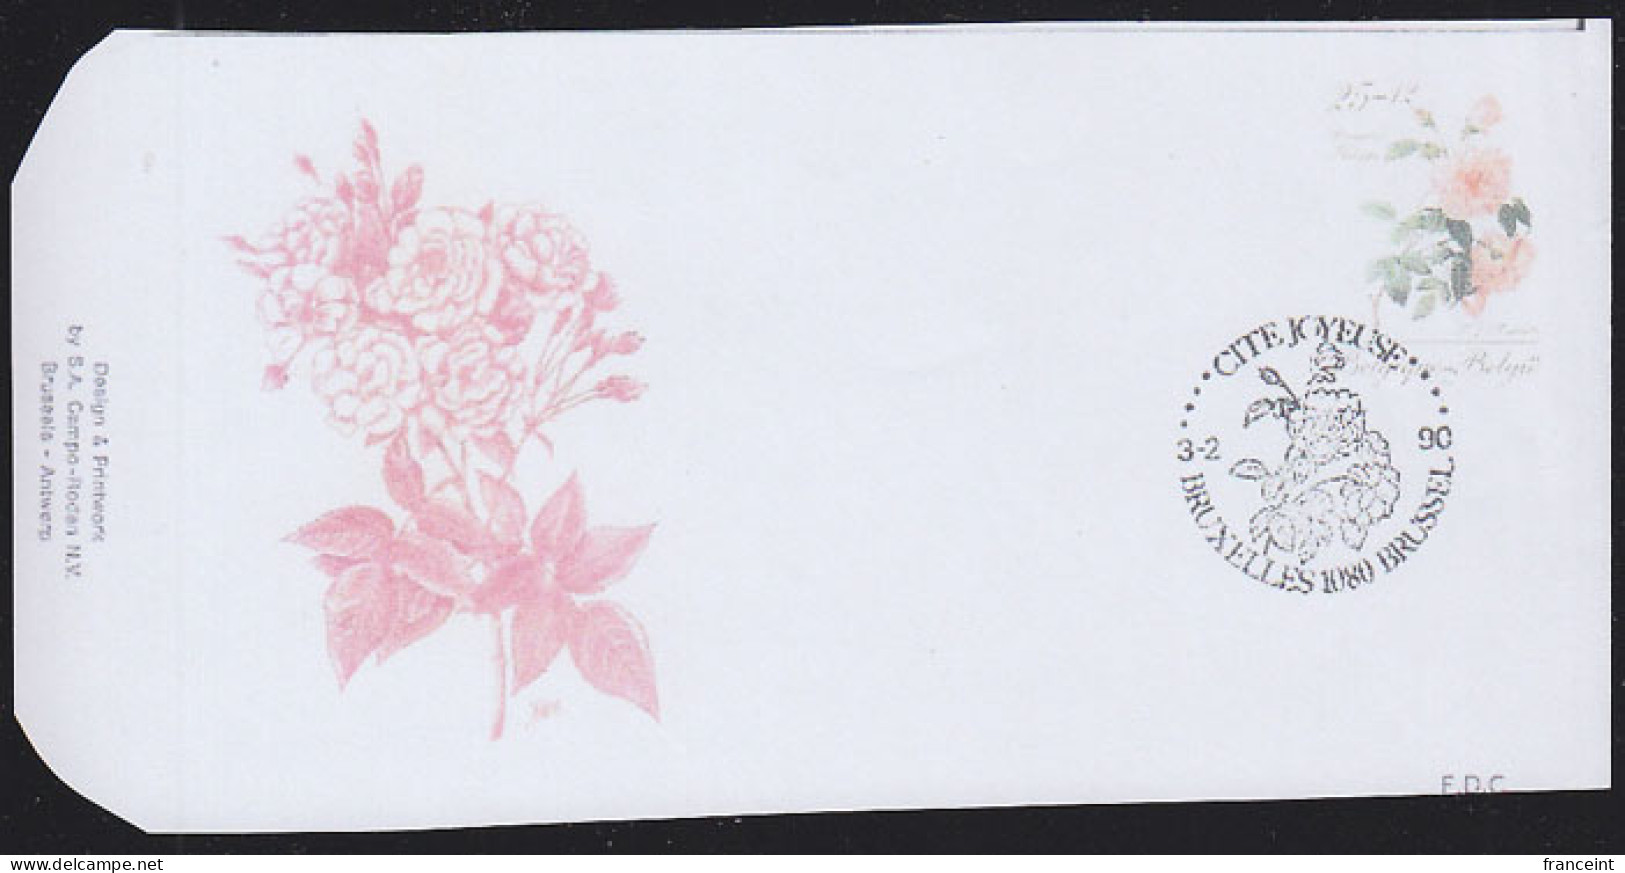 BELGIUM(1990) Bengale Philippe Rose. Die Proof In Red Signed By The Engraver, Representing The Cachet For FDC. Sc B1090 - Proeven & Herdruk